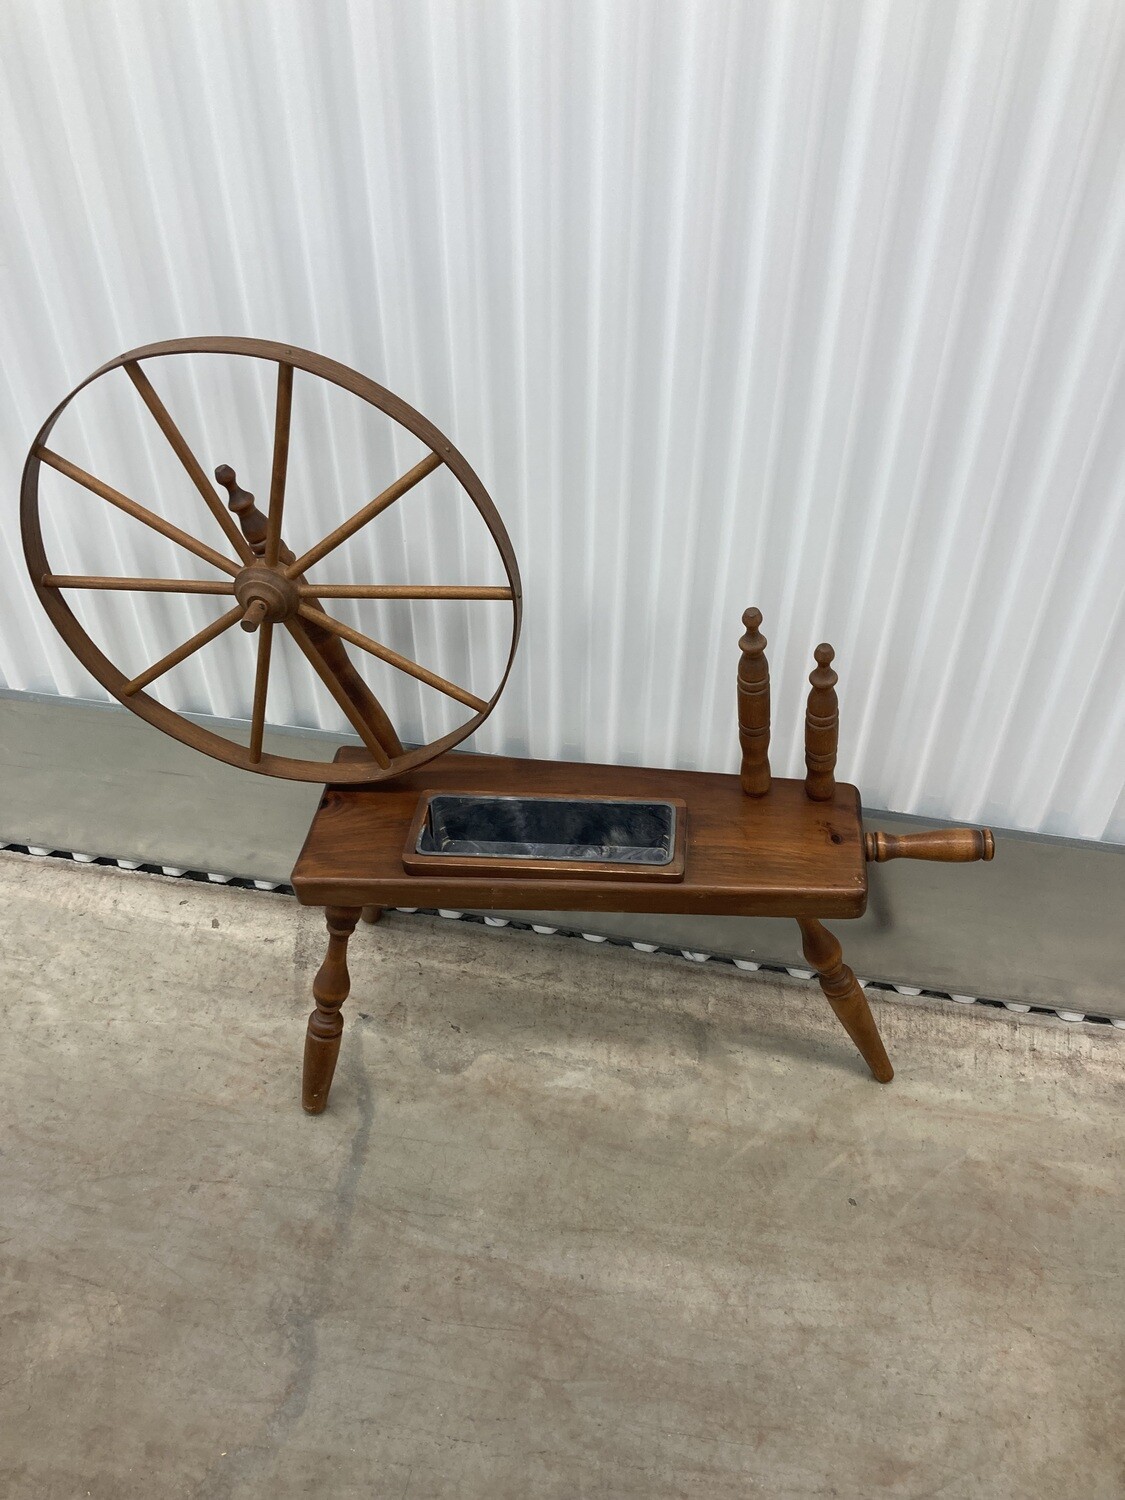 "Spinning Wheel" Planter #2009 ** 5 mos. to sell, reduced